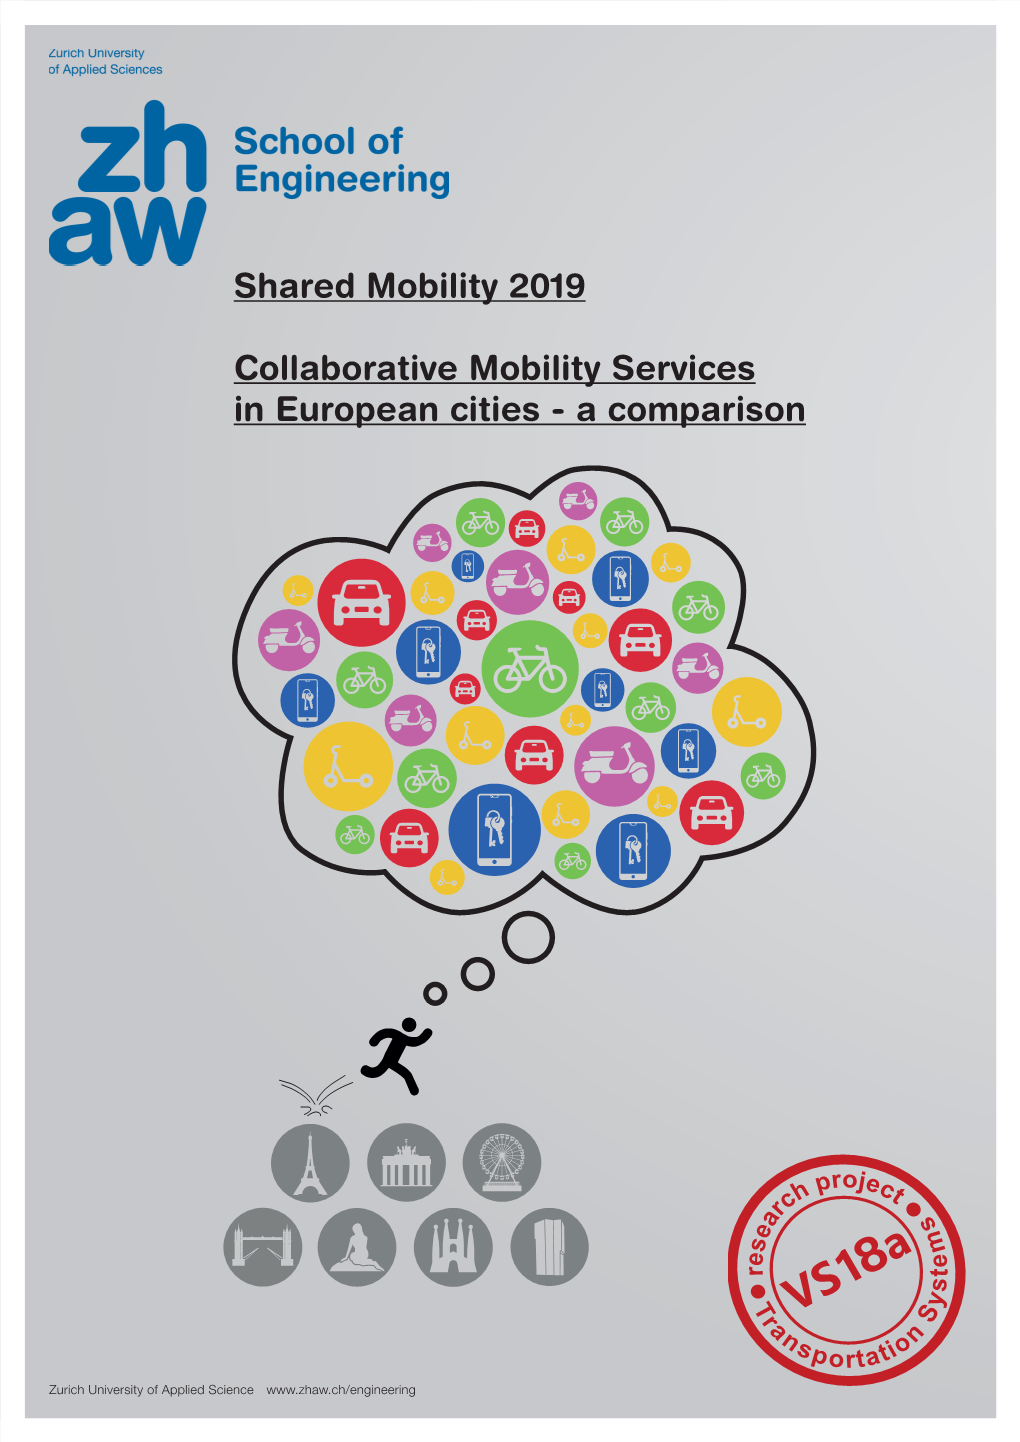 Shared Mobility 2019 Collaborative Mobility Services in European Cities